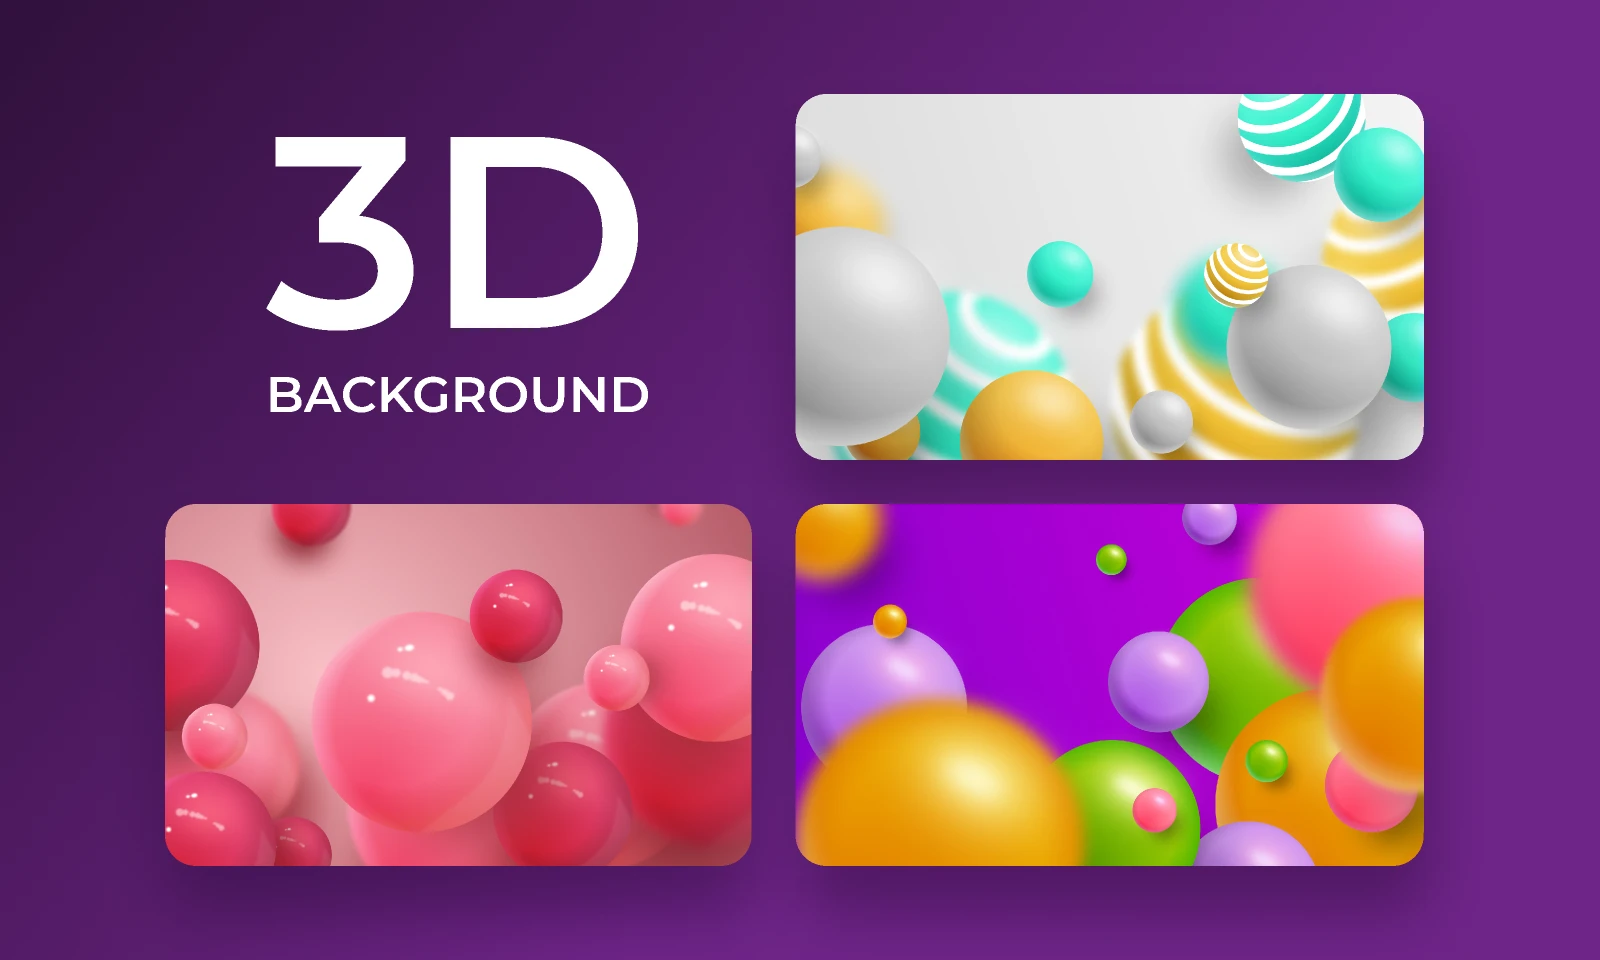 Realistic spheres 3D background [FREE] for Figma and Adobe XD